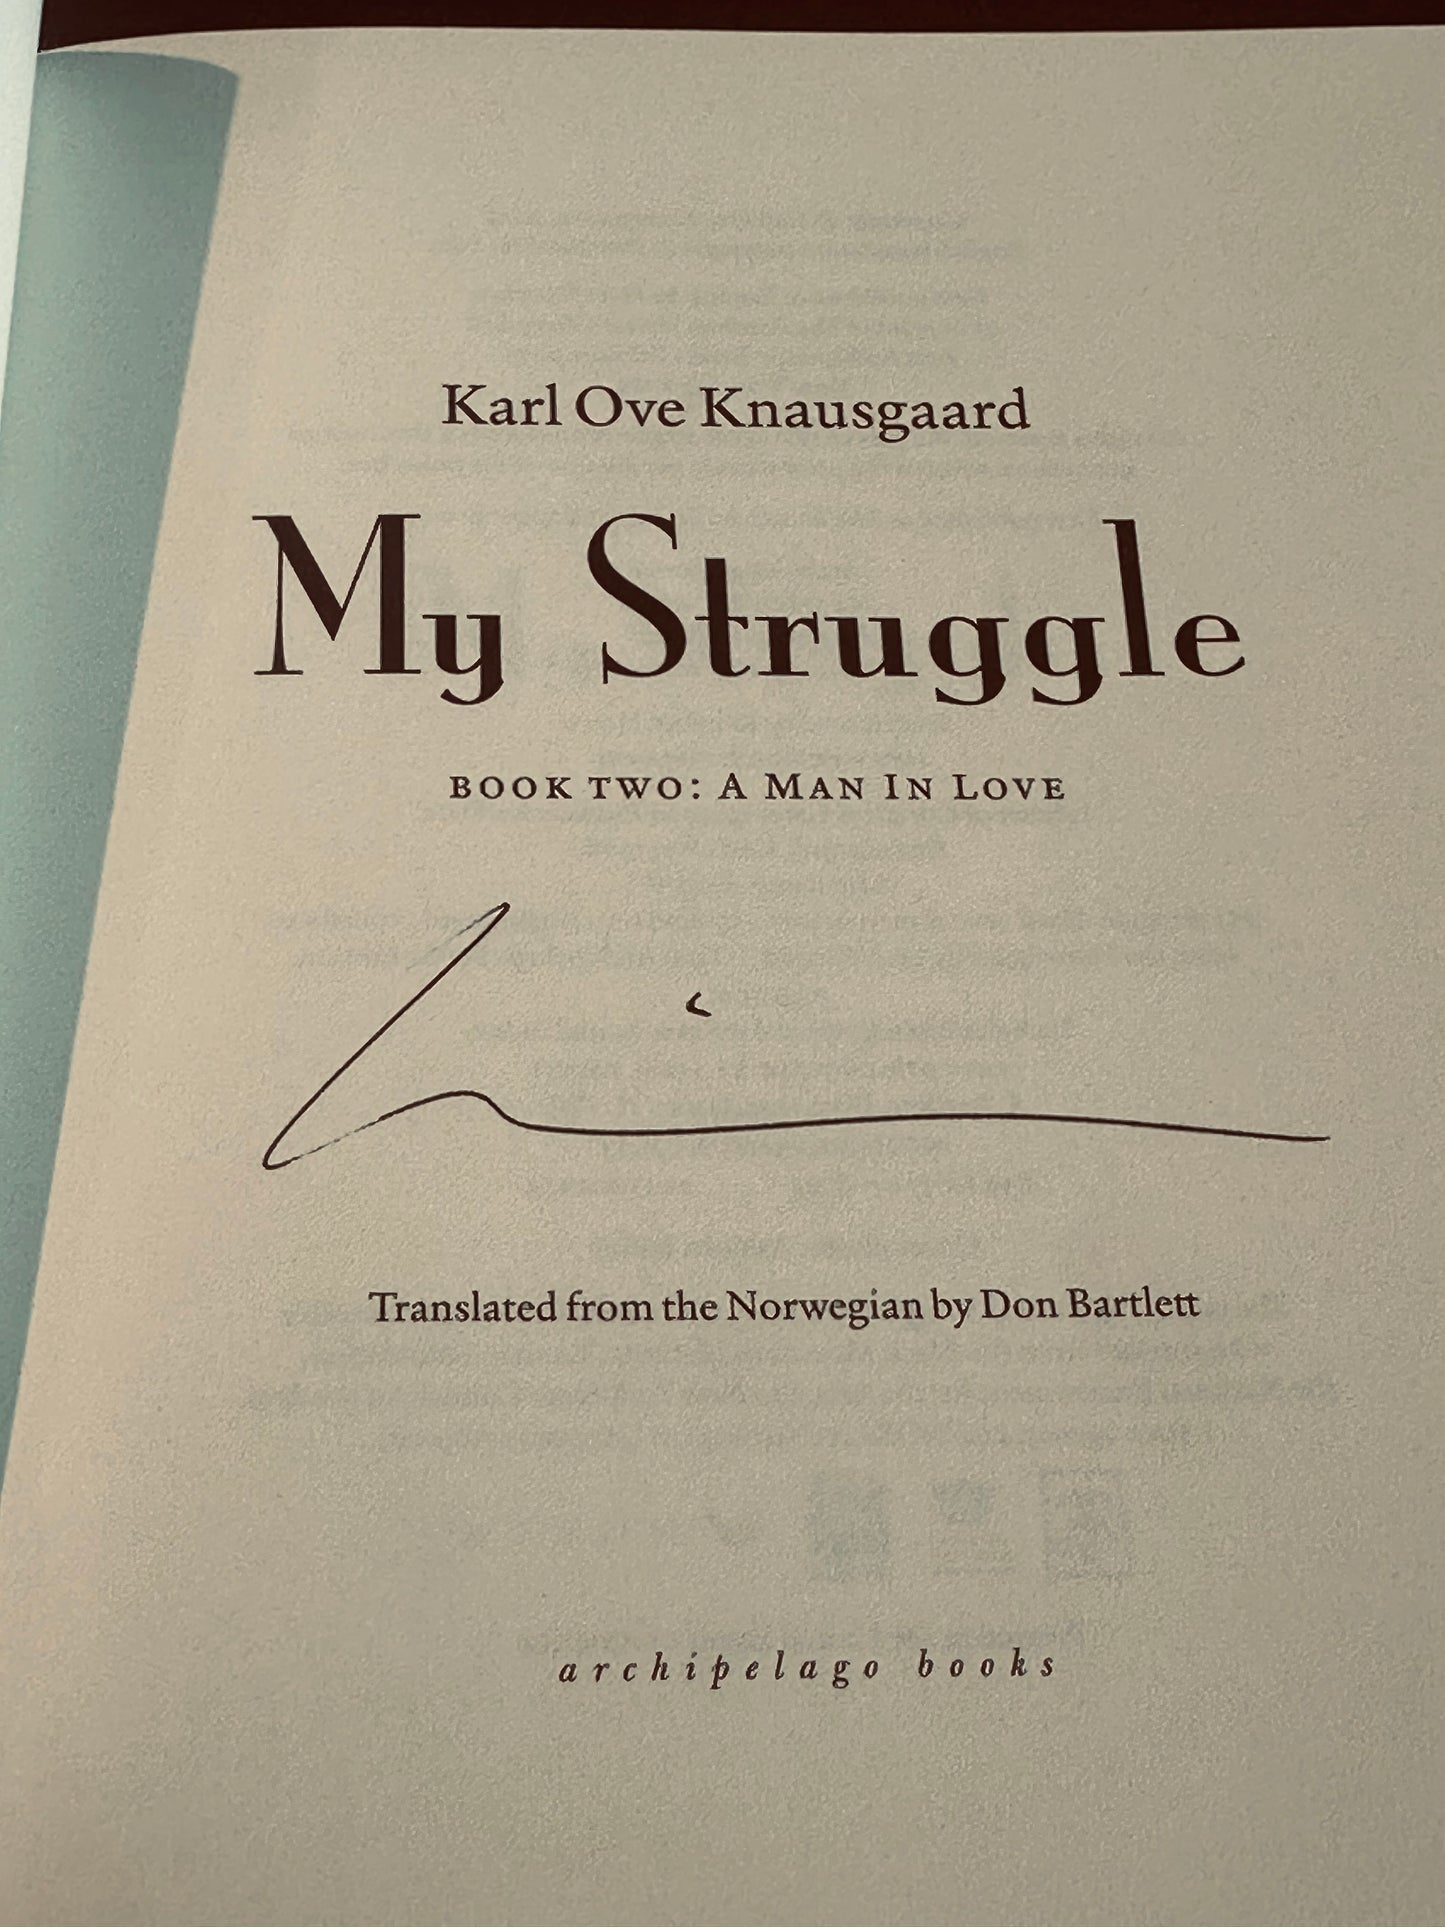 My Struggle by Karl Ove Knausgaard (First Edition, Signed)